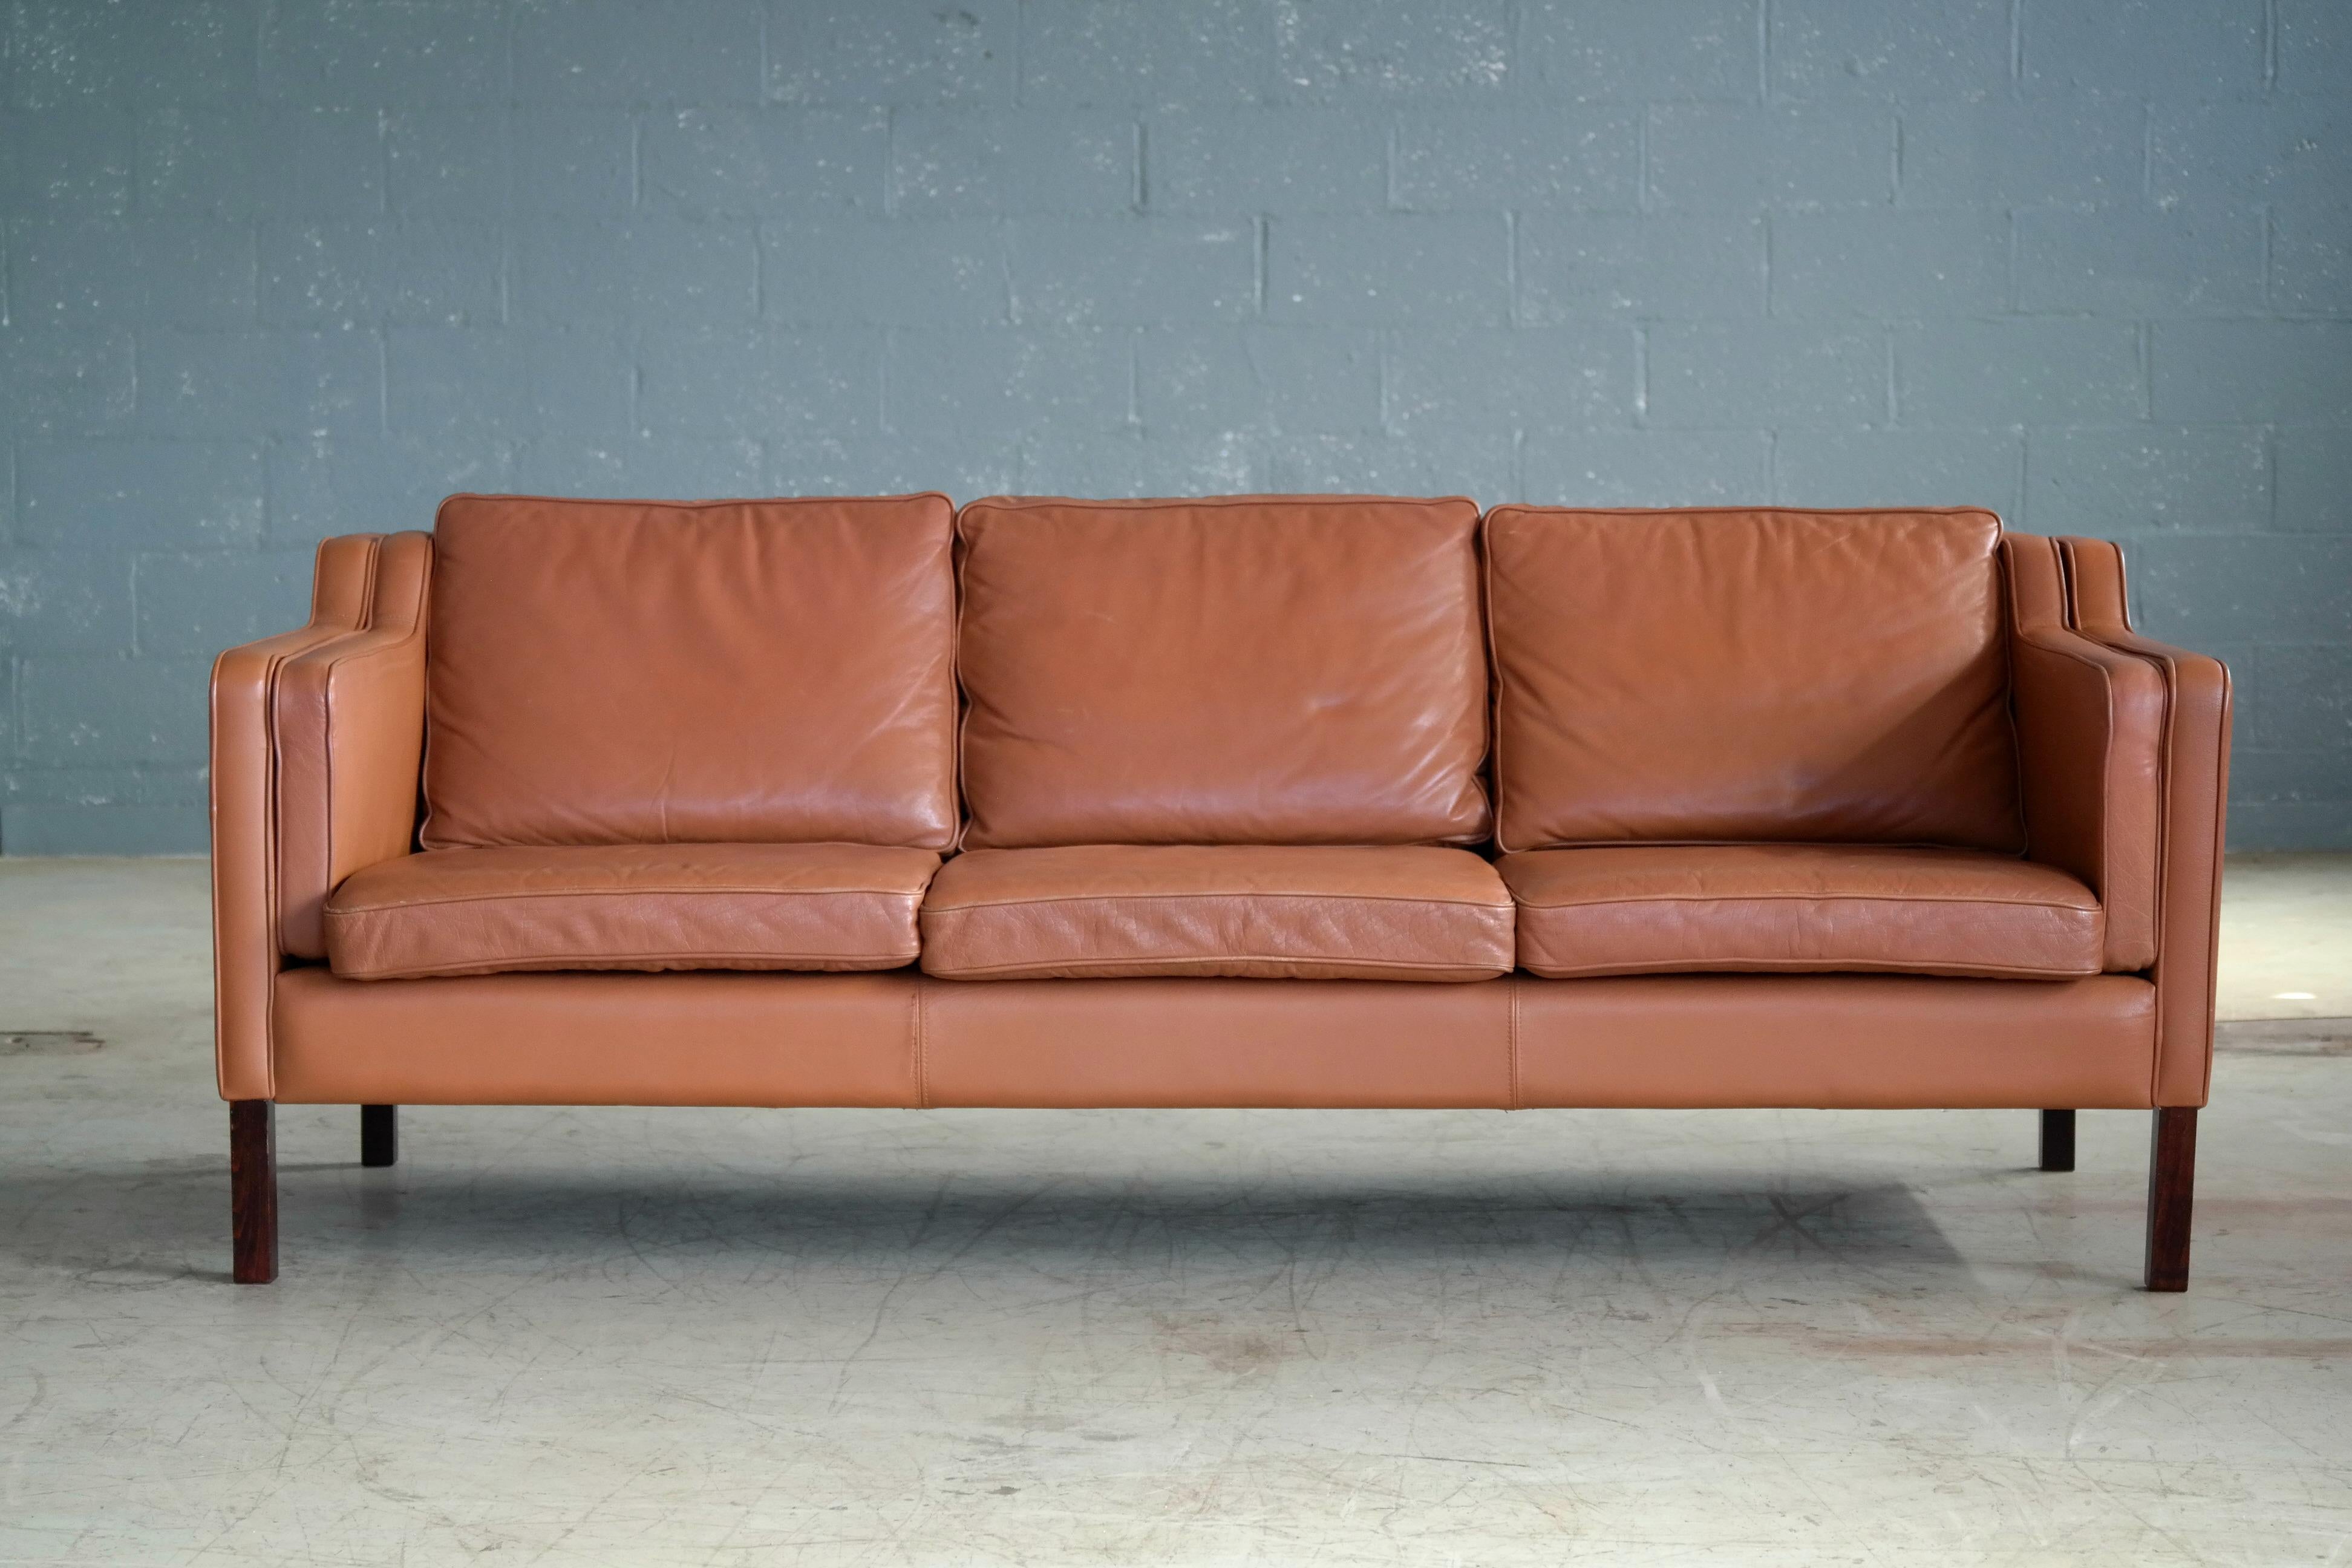 Classic Borge Mogensen style three-seat sofa in cognac leather by Stouby Mobler, Denmark. Buffalo hide raised on legs of beech. High quality craftsmanship and overall very good condition showing some natural age wear and patina with a couple of